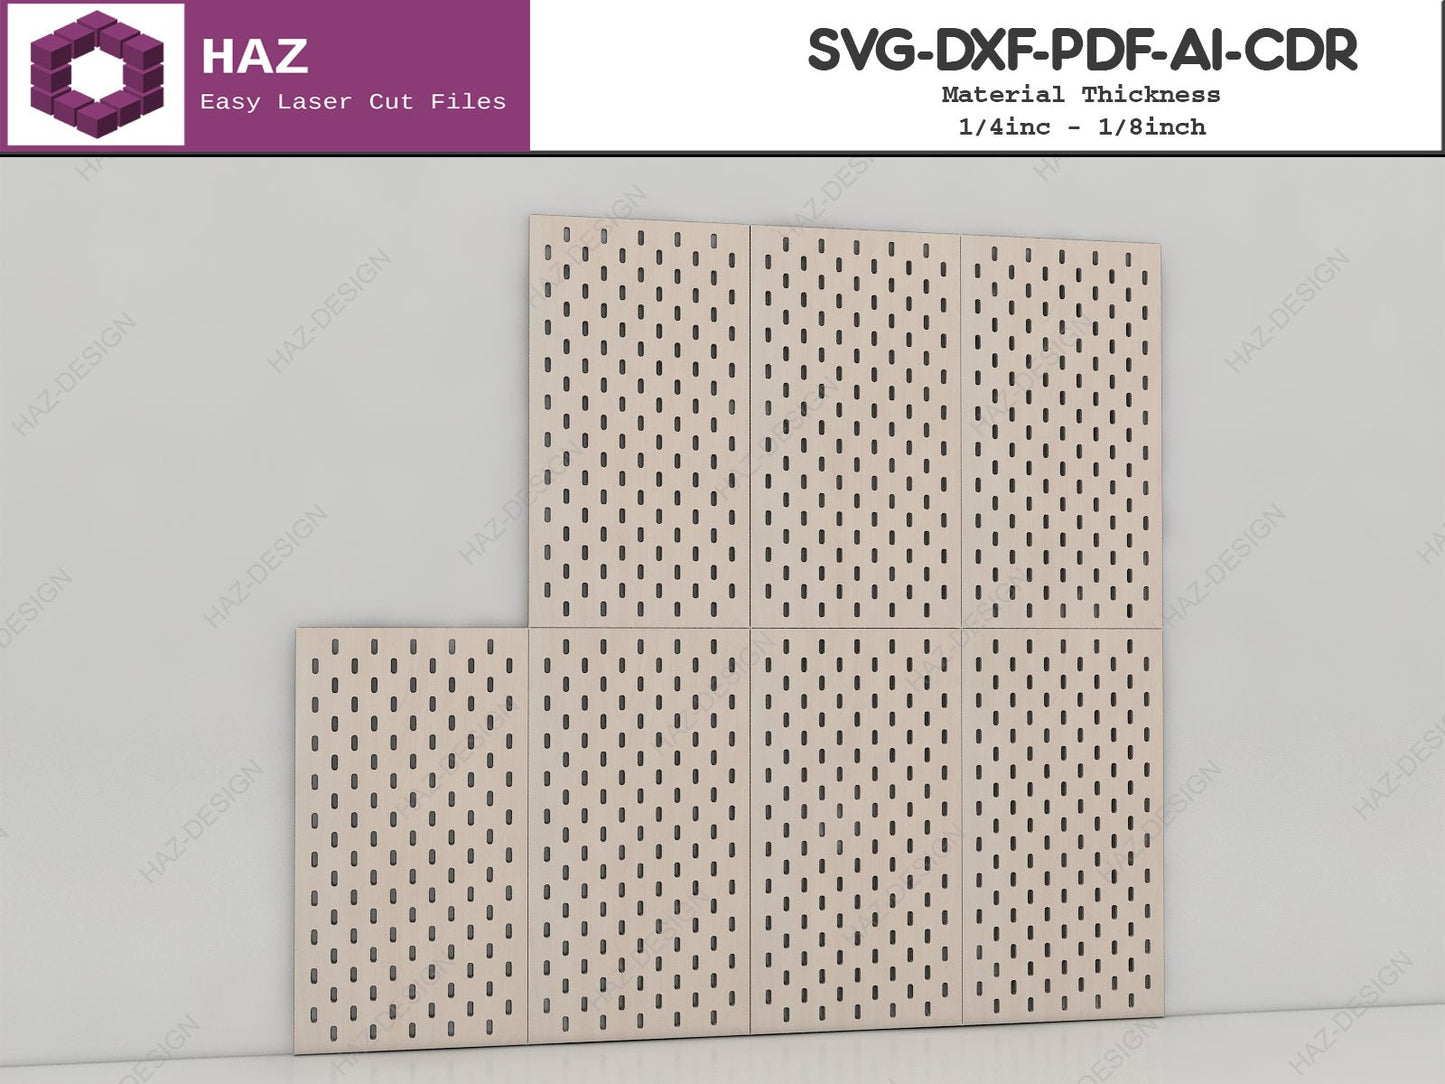 Wood Pegboard Wall Organizer / Hanging Peg board with hooks / Peg Notice Board SVG CDR Ai DXF 084